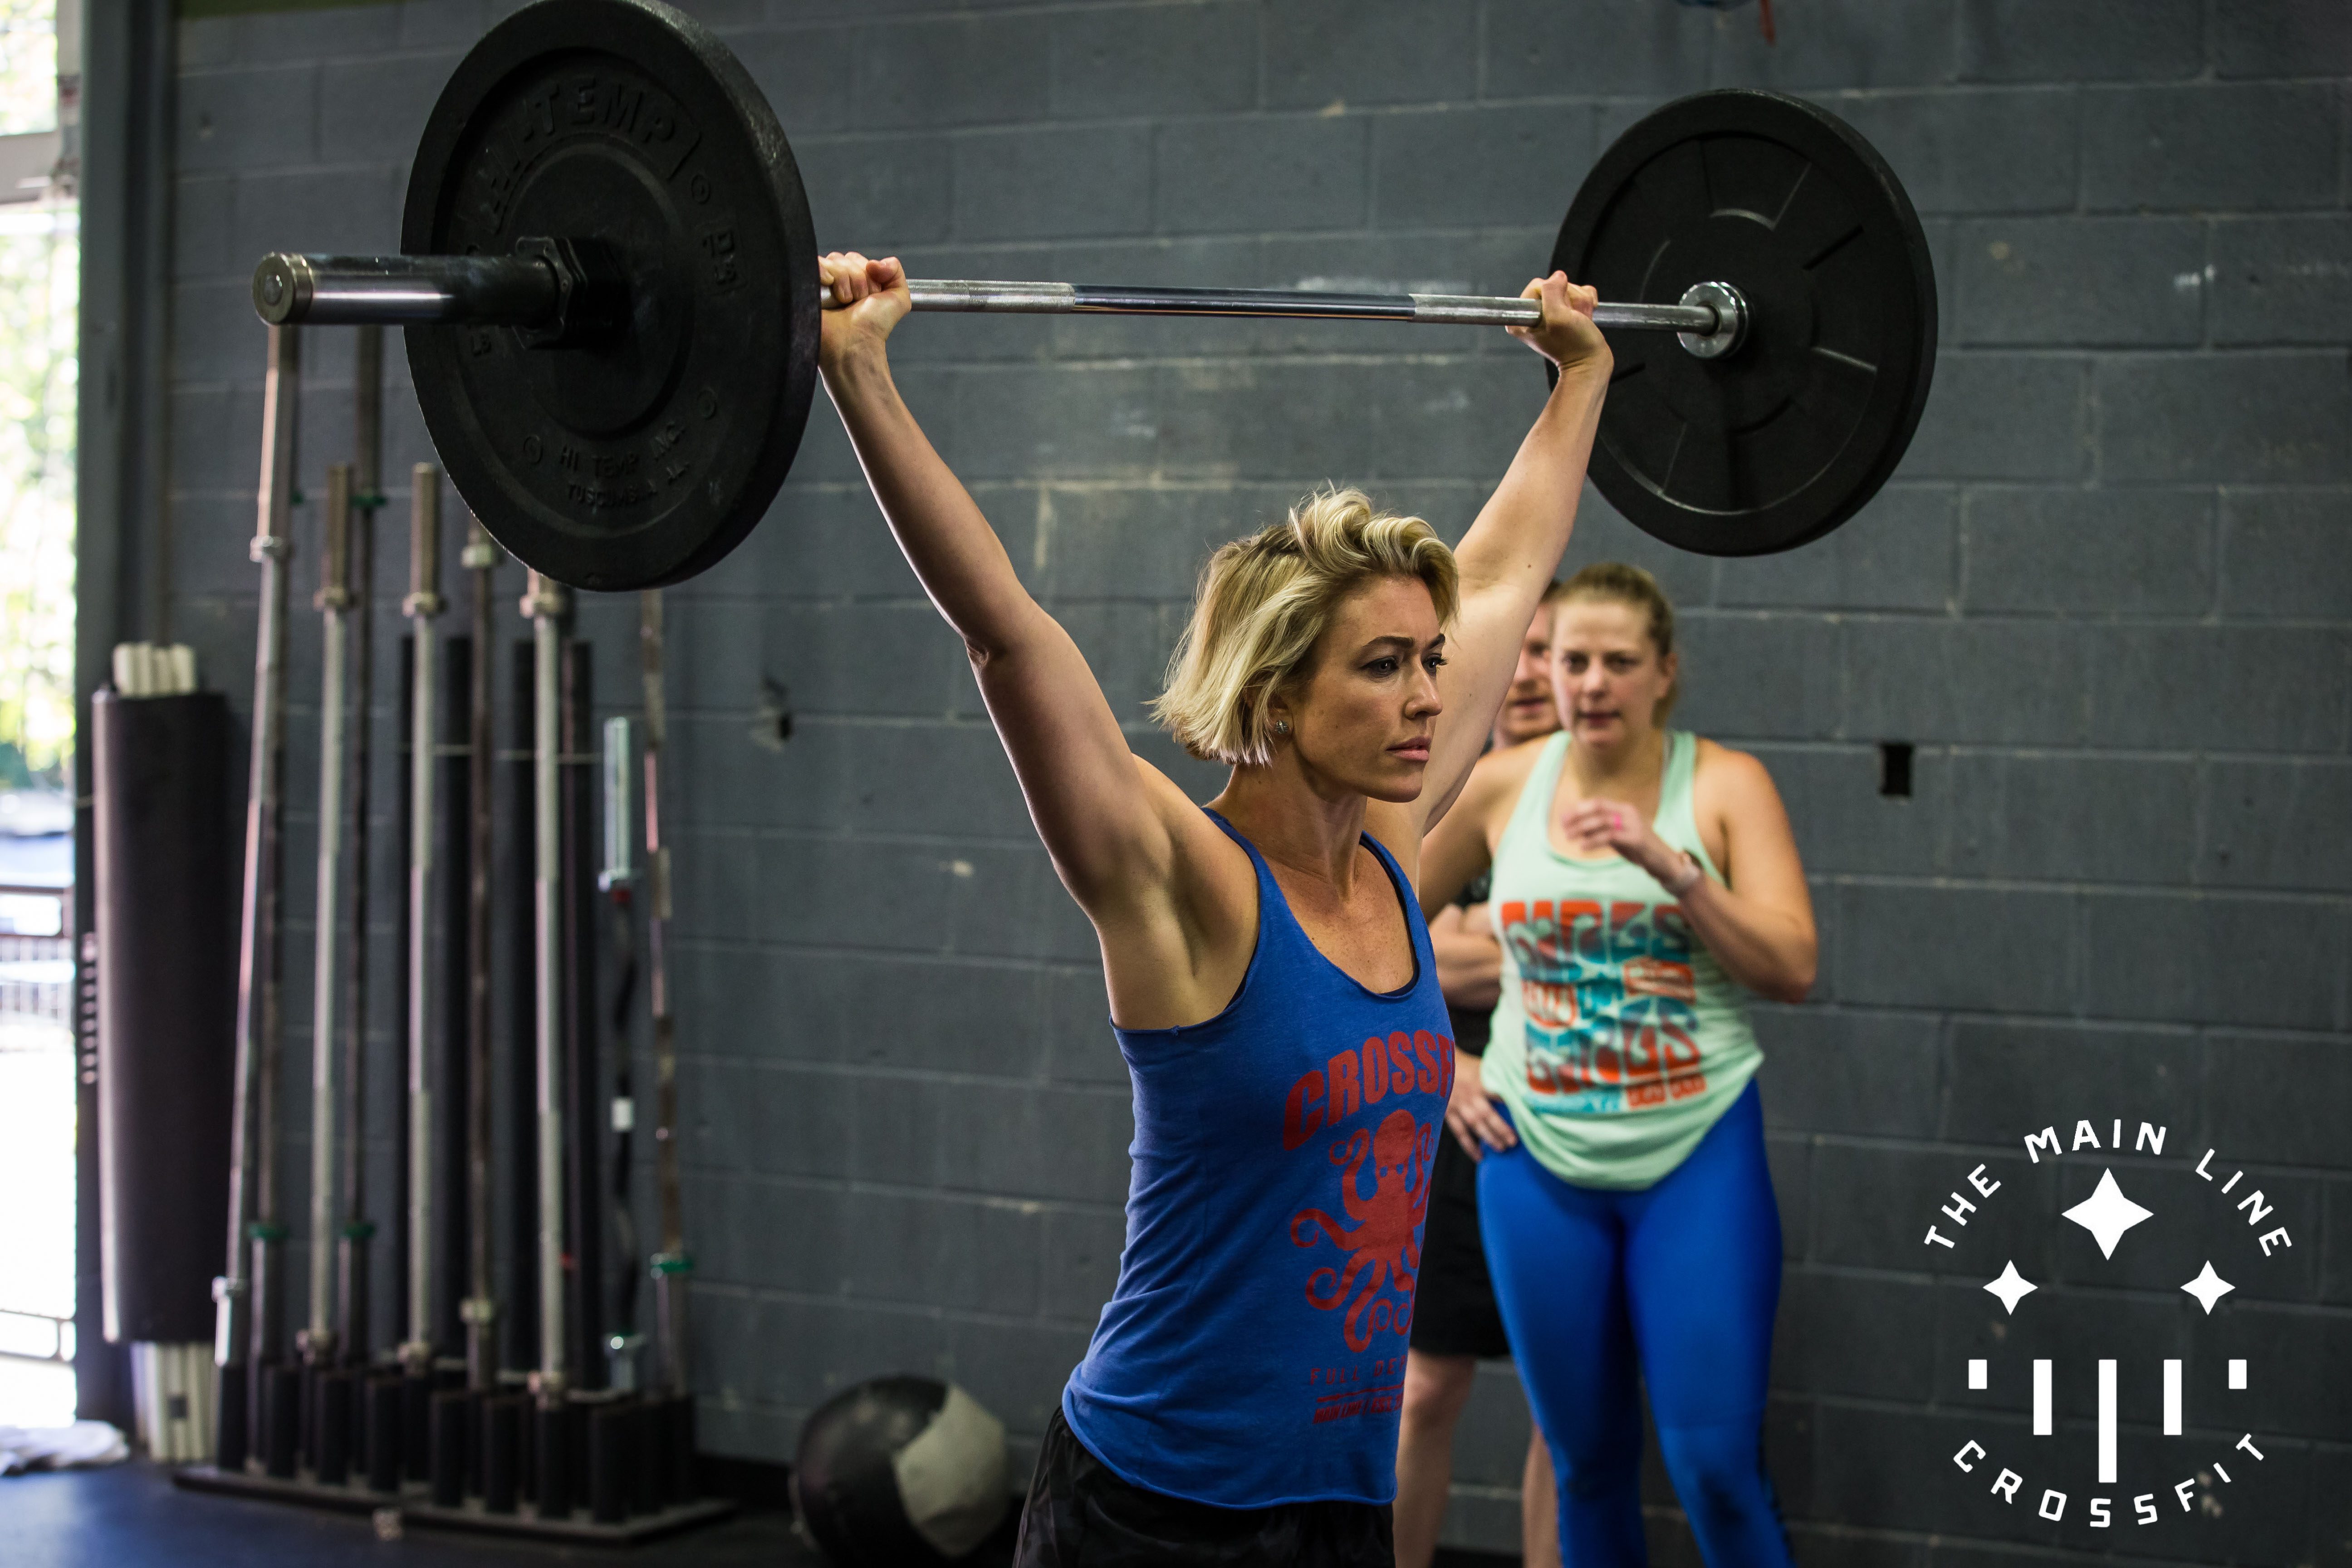 Tuesday 10.30.18 CrossFit